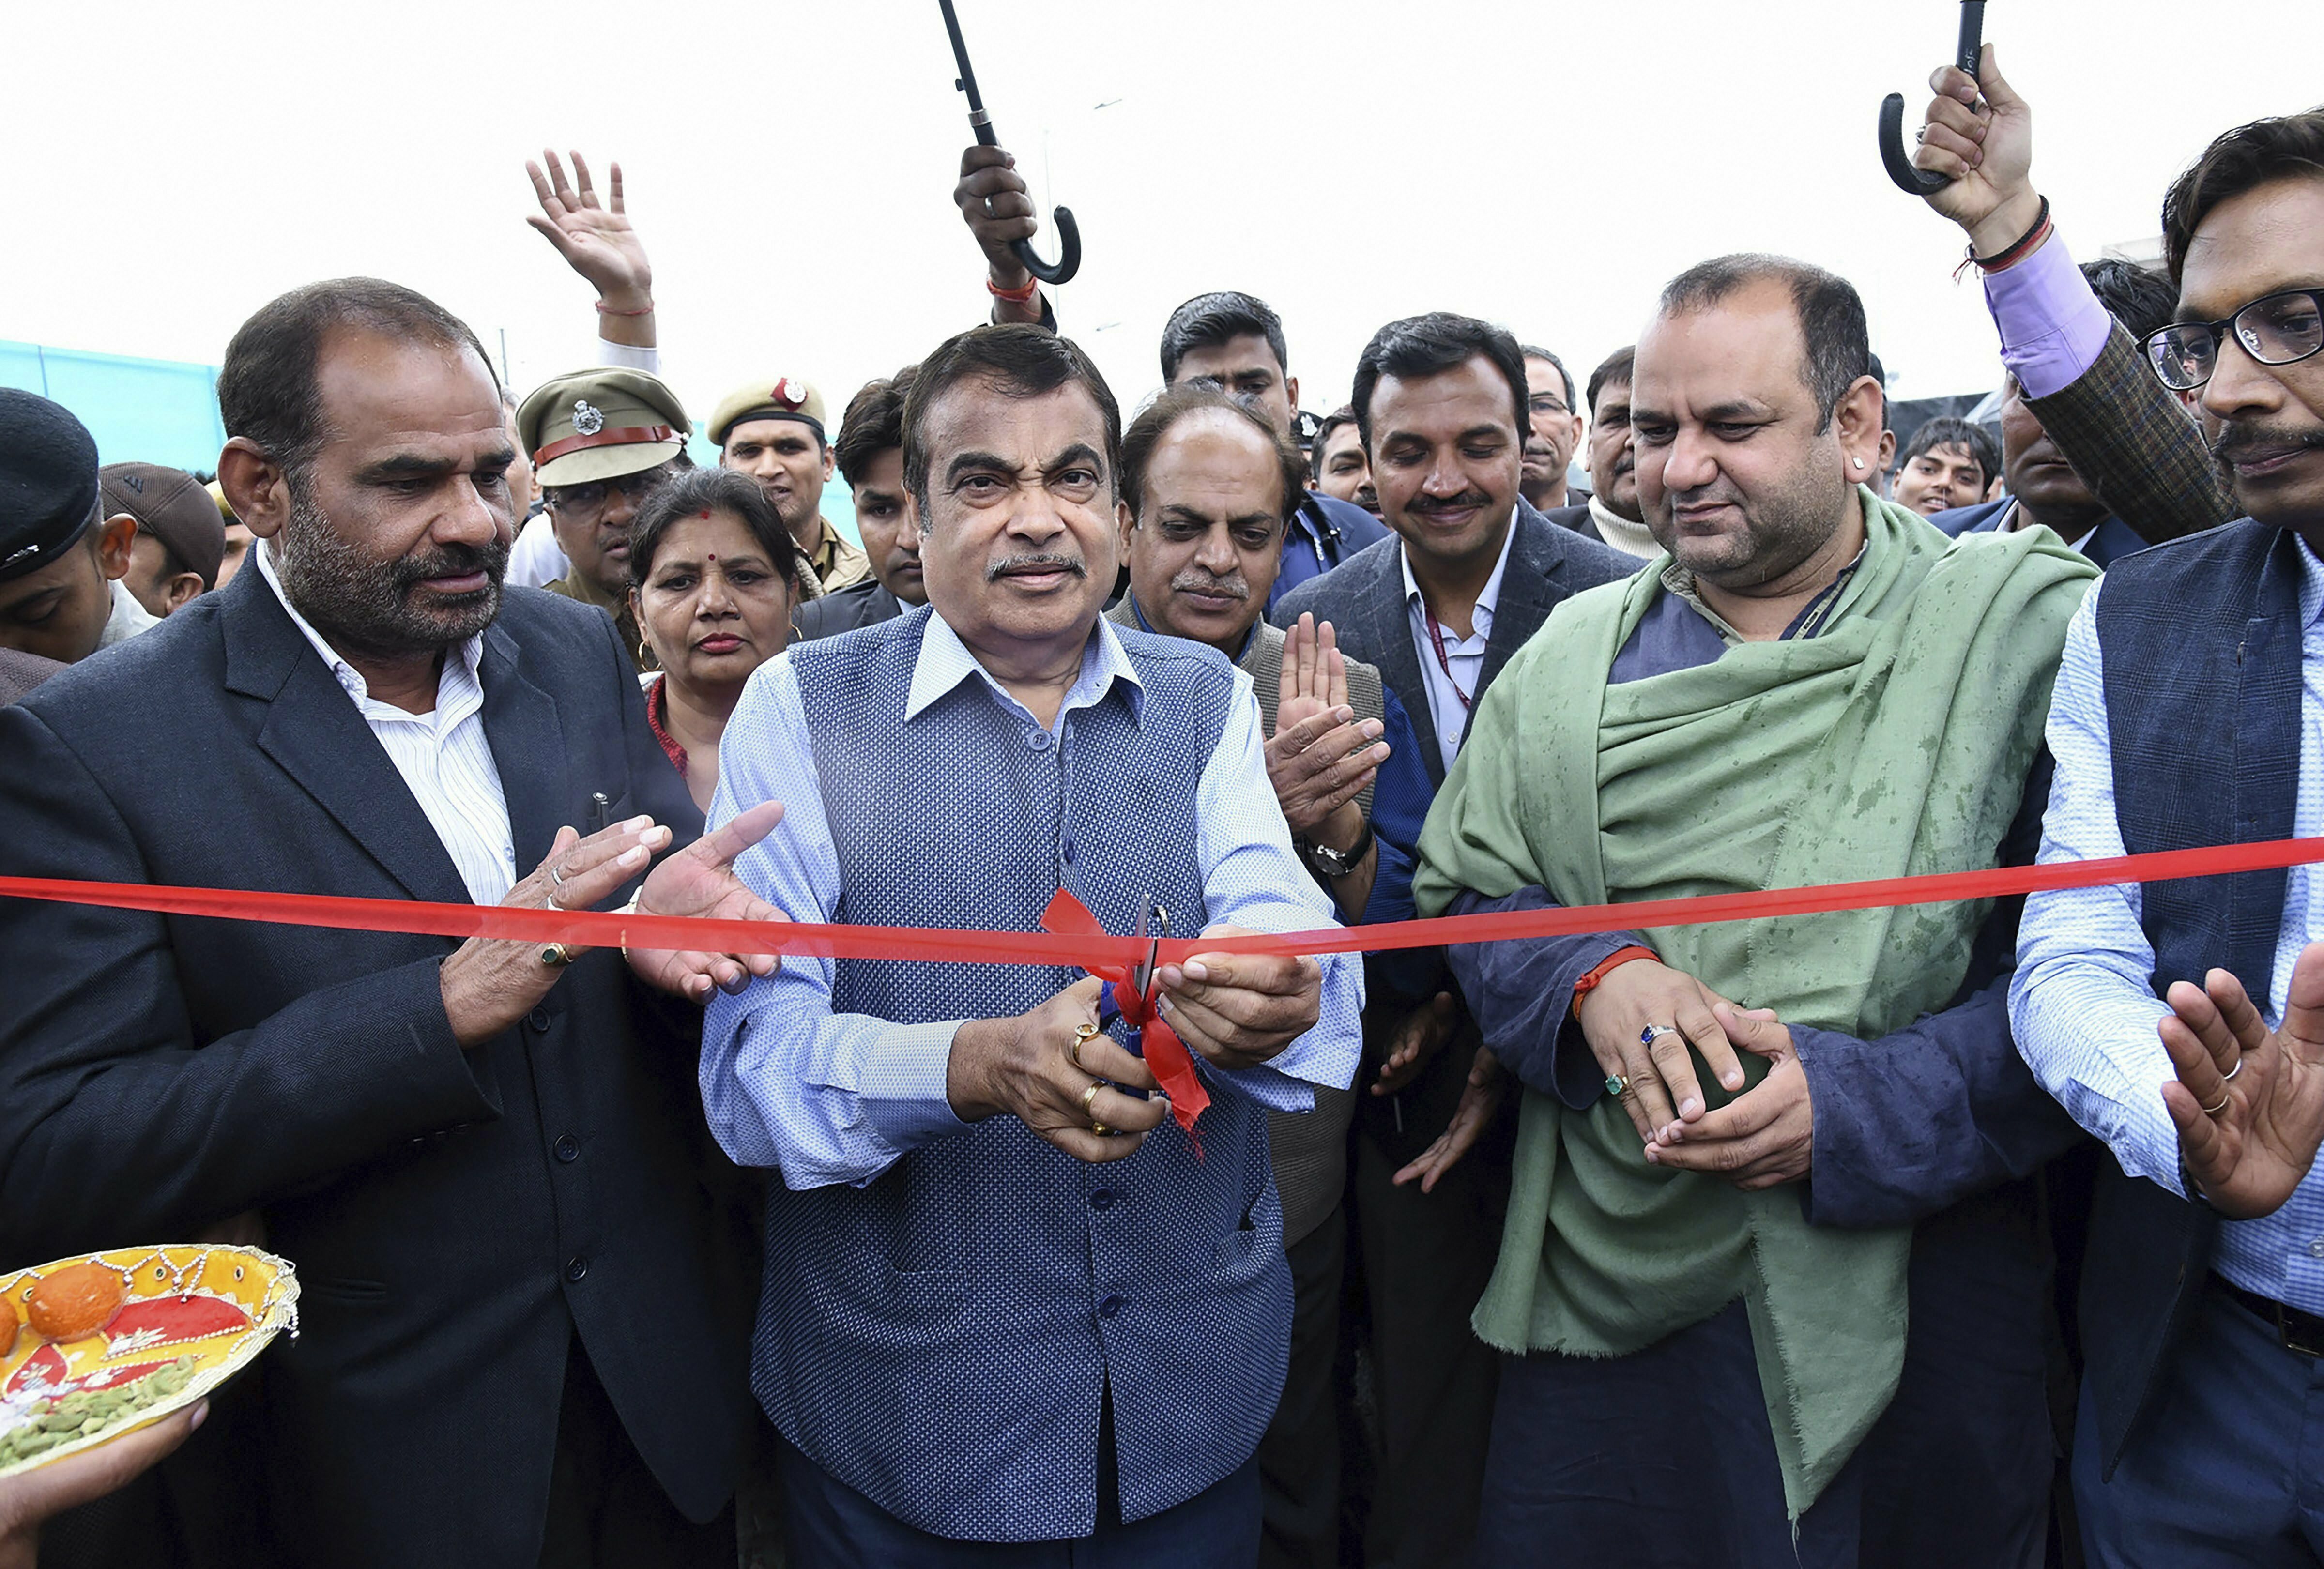 Union Minister for Road Transport & Highways, Shipping and Water Resources, River Development & Ganga Rejuvenation Nitin Gadkari inaugurates the Dhaula Kuan Flyover, in New Delhi - PTI